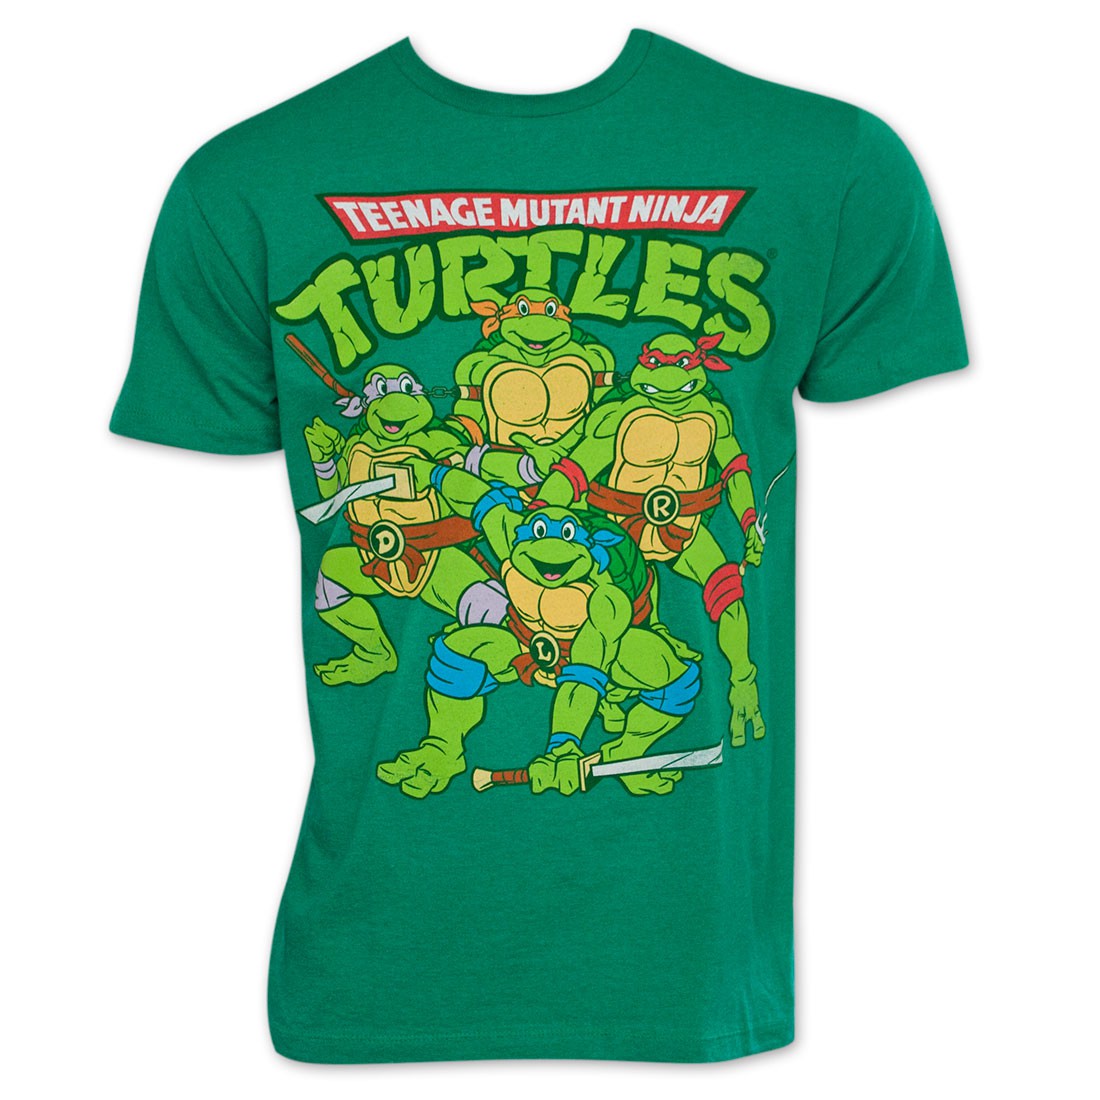 https://mmv2api.s3.us-east-2.amazonaws.com/products/images/TMNT_Group_Pose_New_Green_Shirt2_LG.jpg